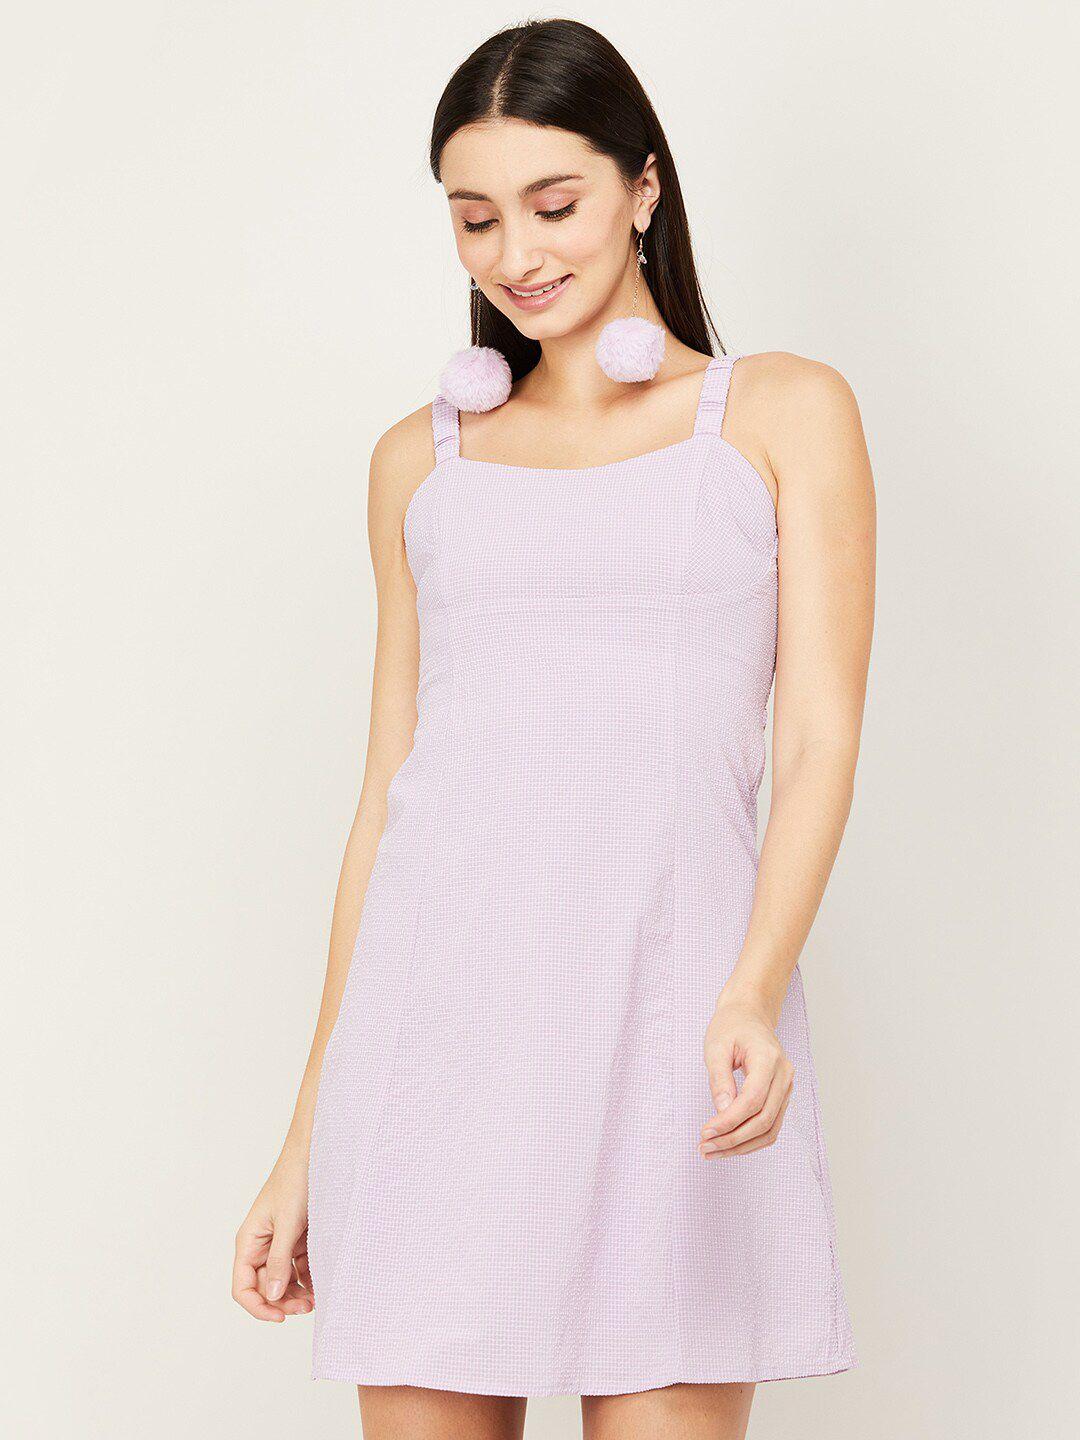 ginger-by-lifestyle-lavender-checked-a-line-dress